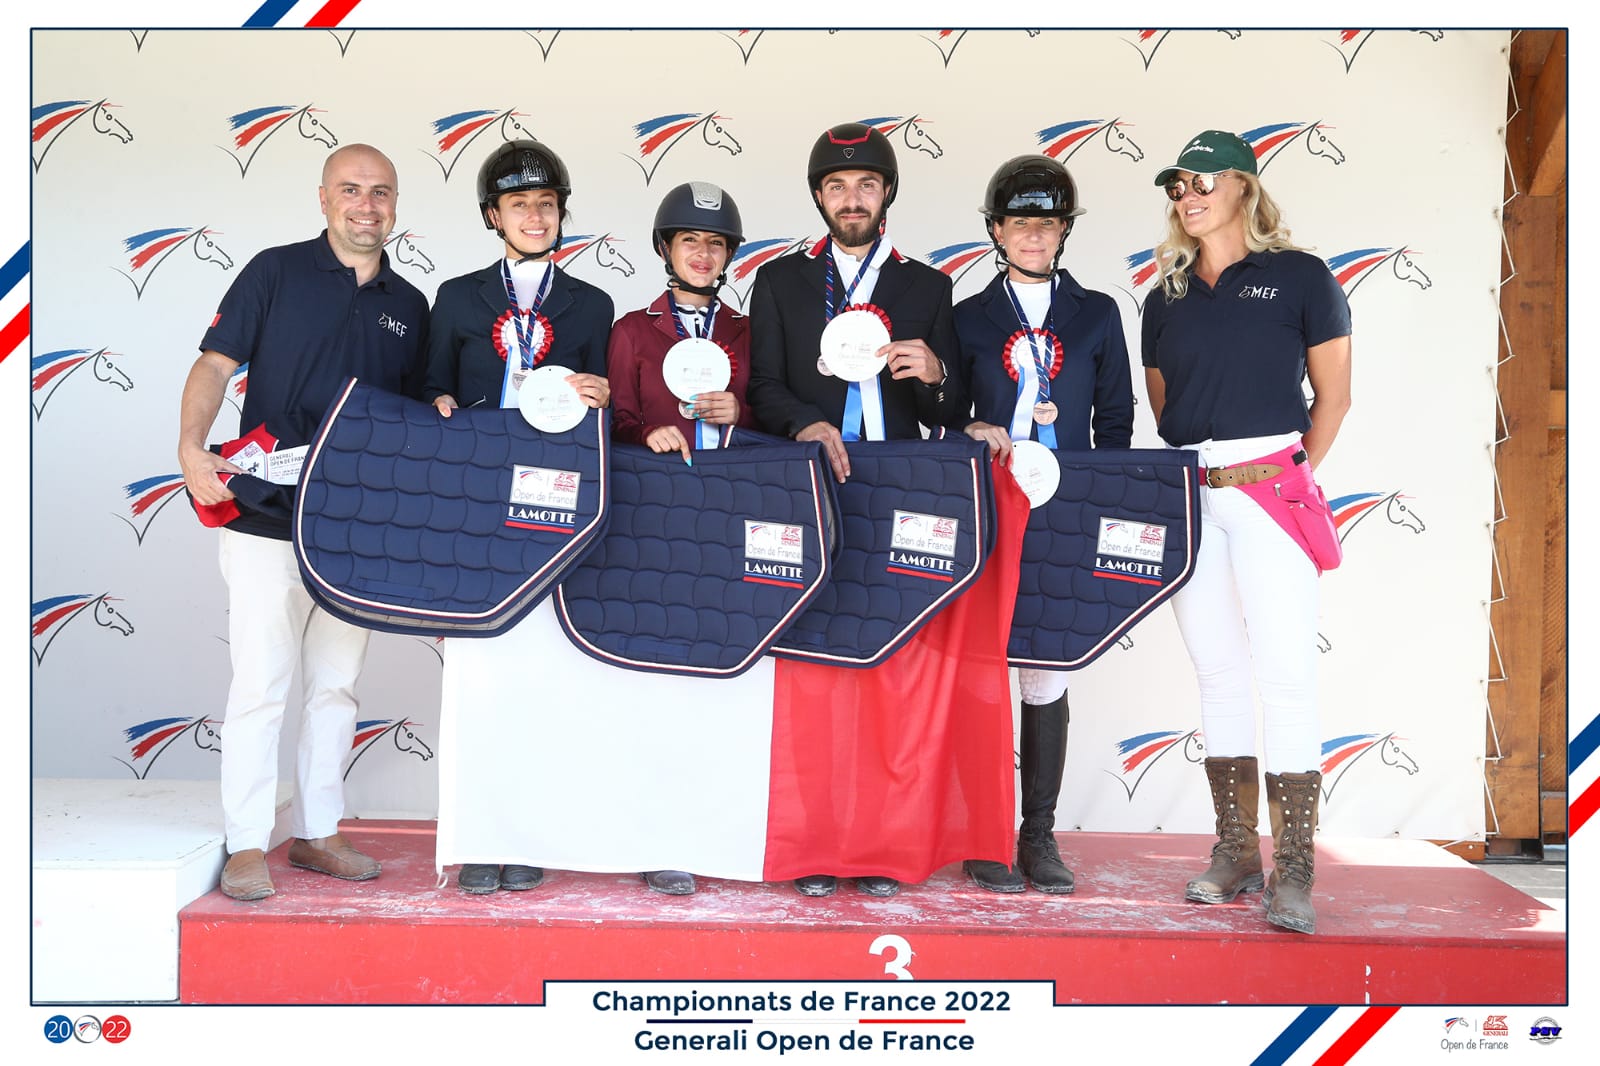 Malta takes third place in show jumping at the World Clubs Tournament in France